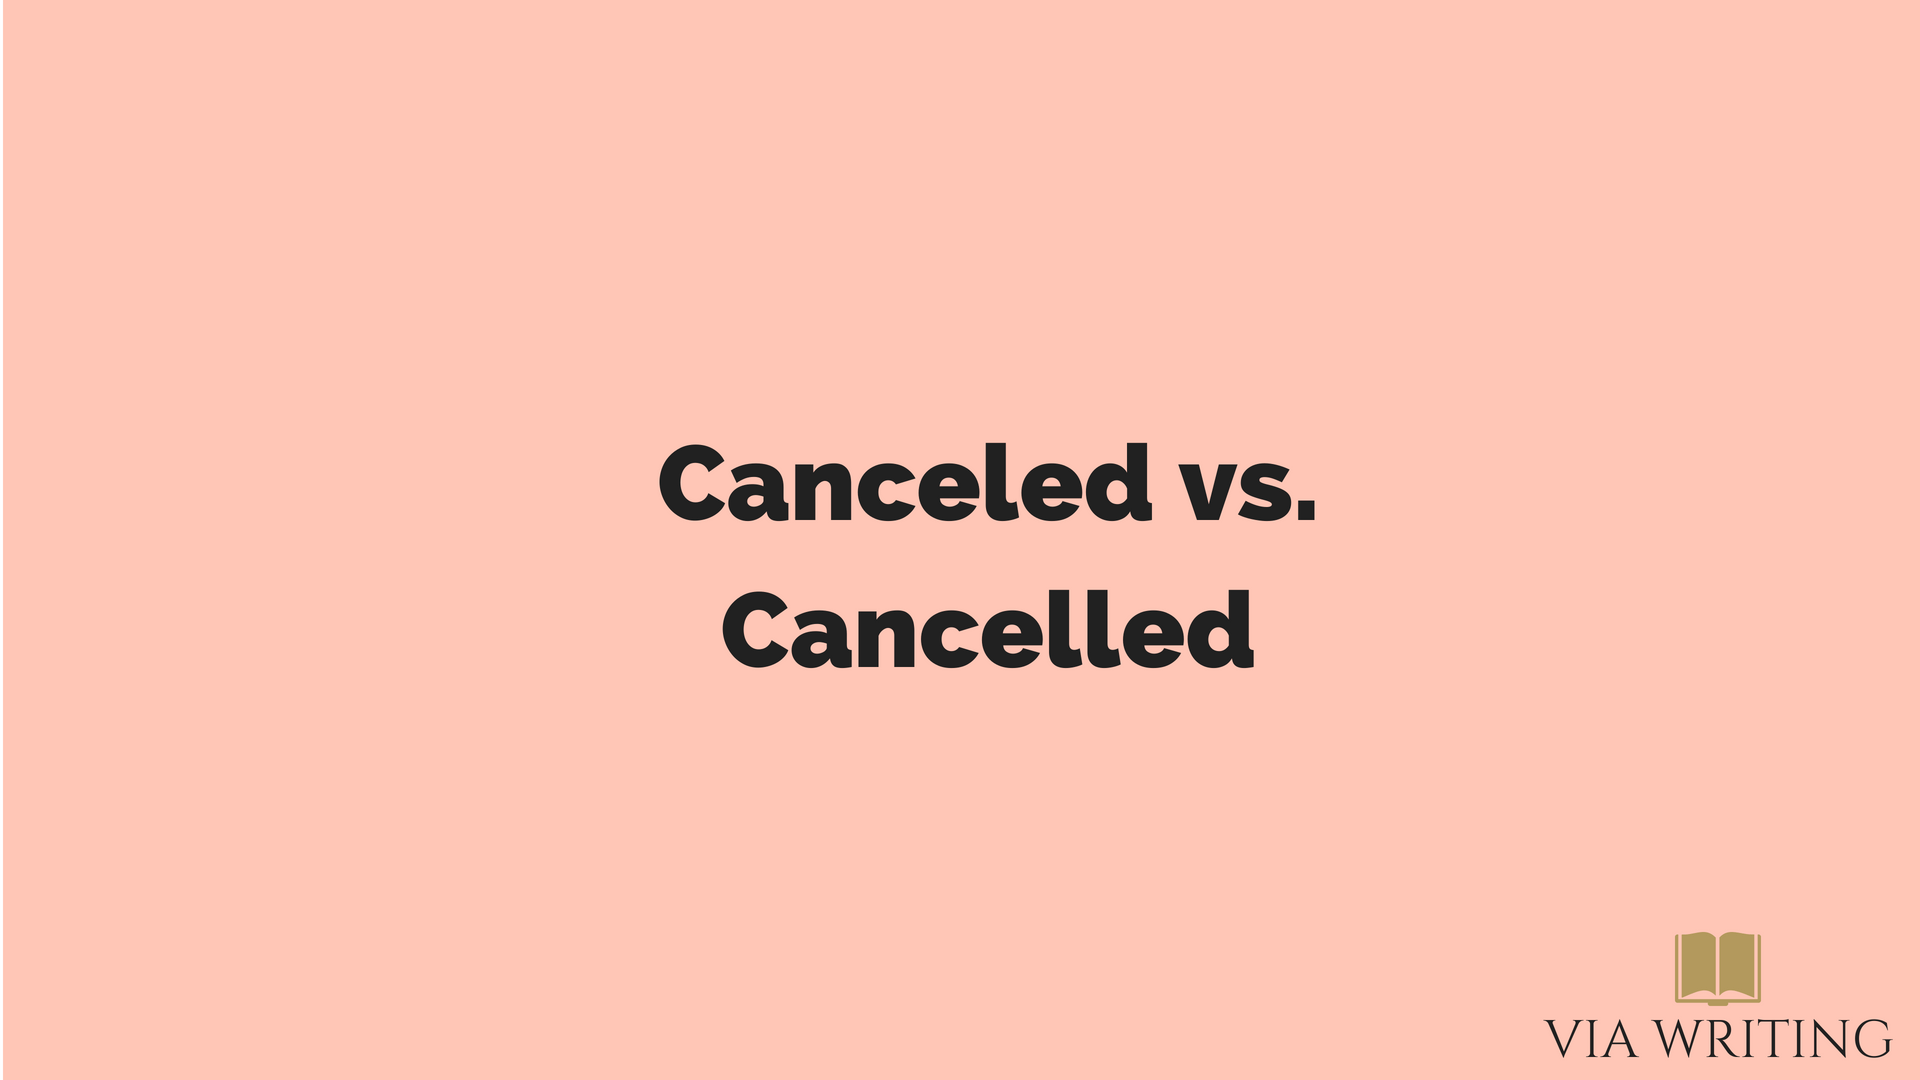 Canceled vs. Cancelled